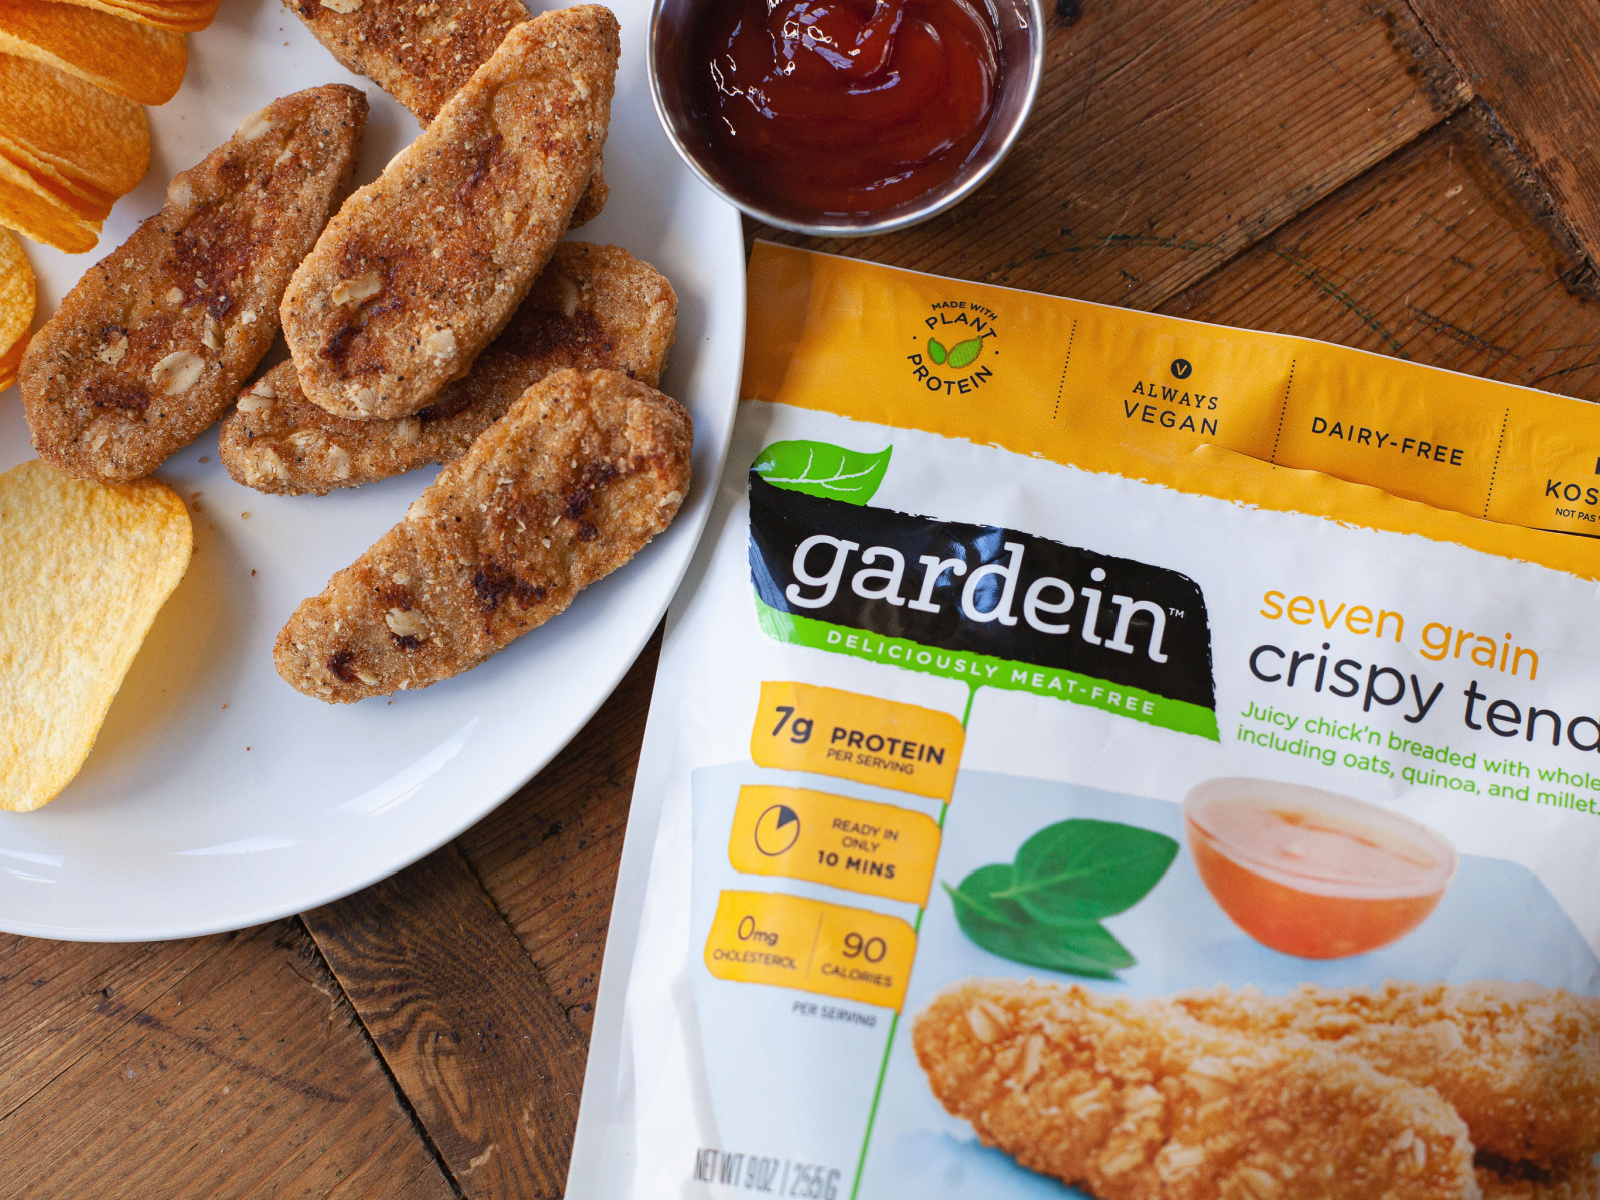 Gardein Meat-Free Products As Low As $1.50 At Publix on I Heart Publix 1